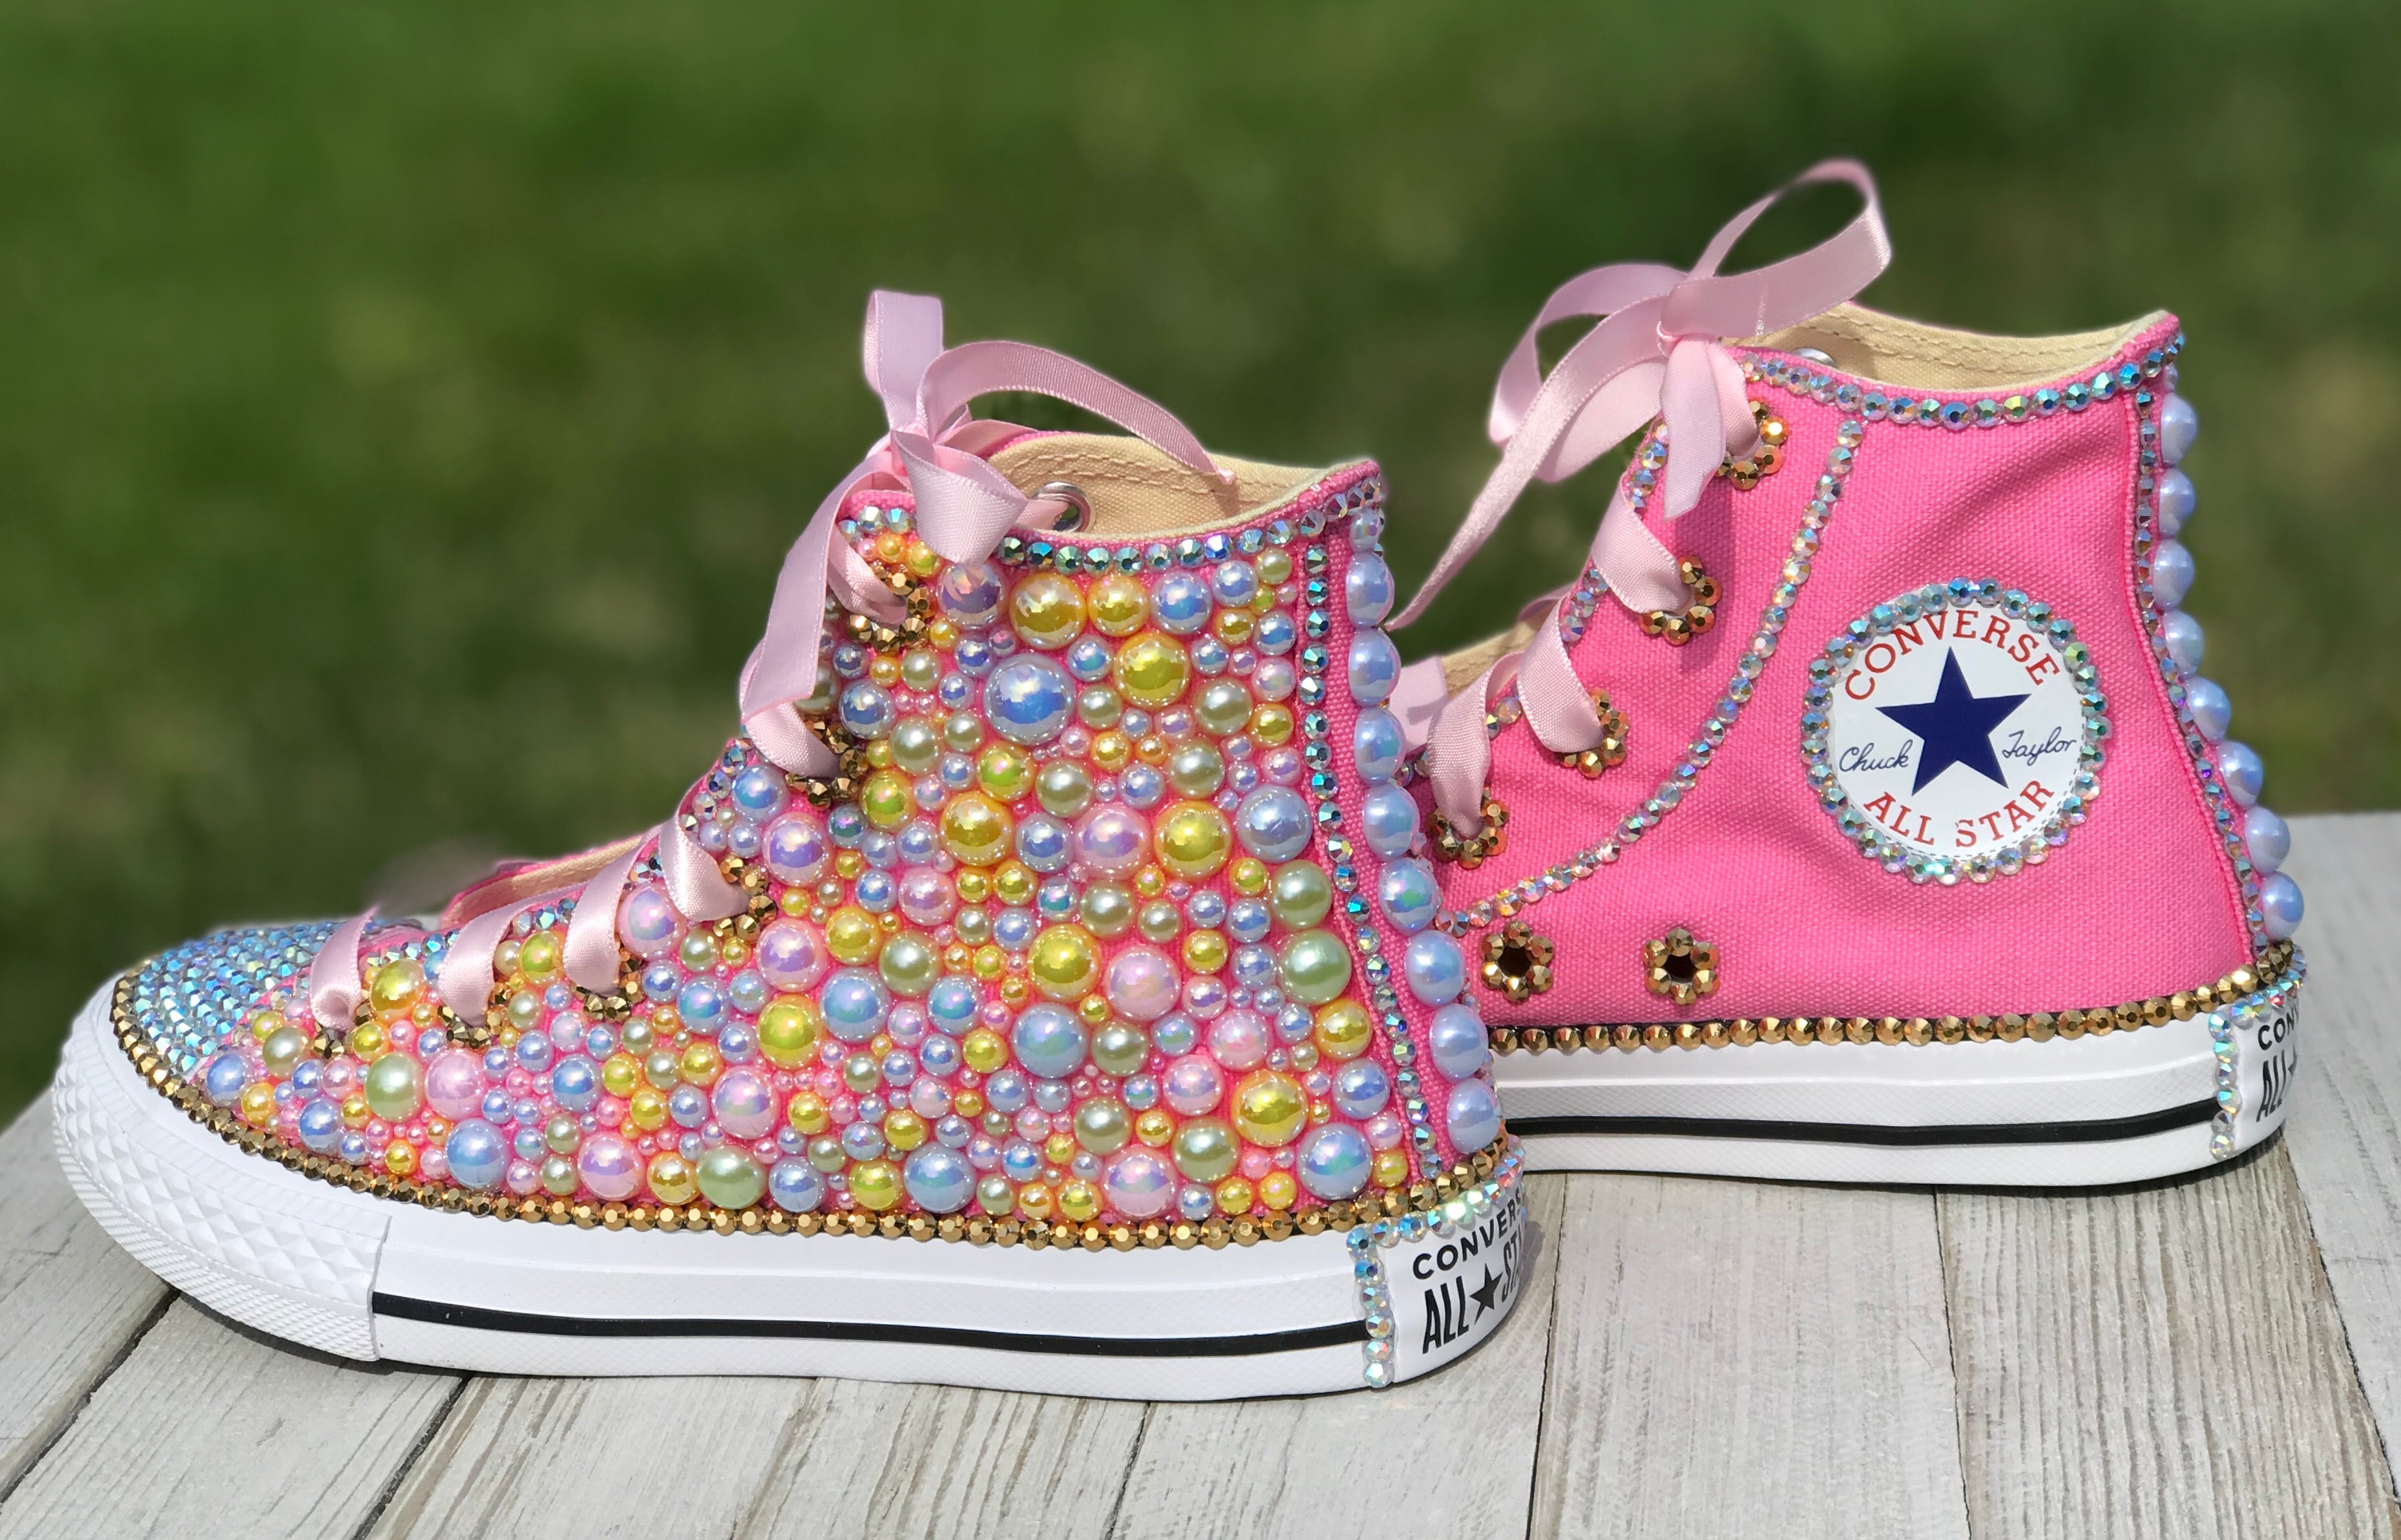 Pink Bedazzled Converse Sneakers